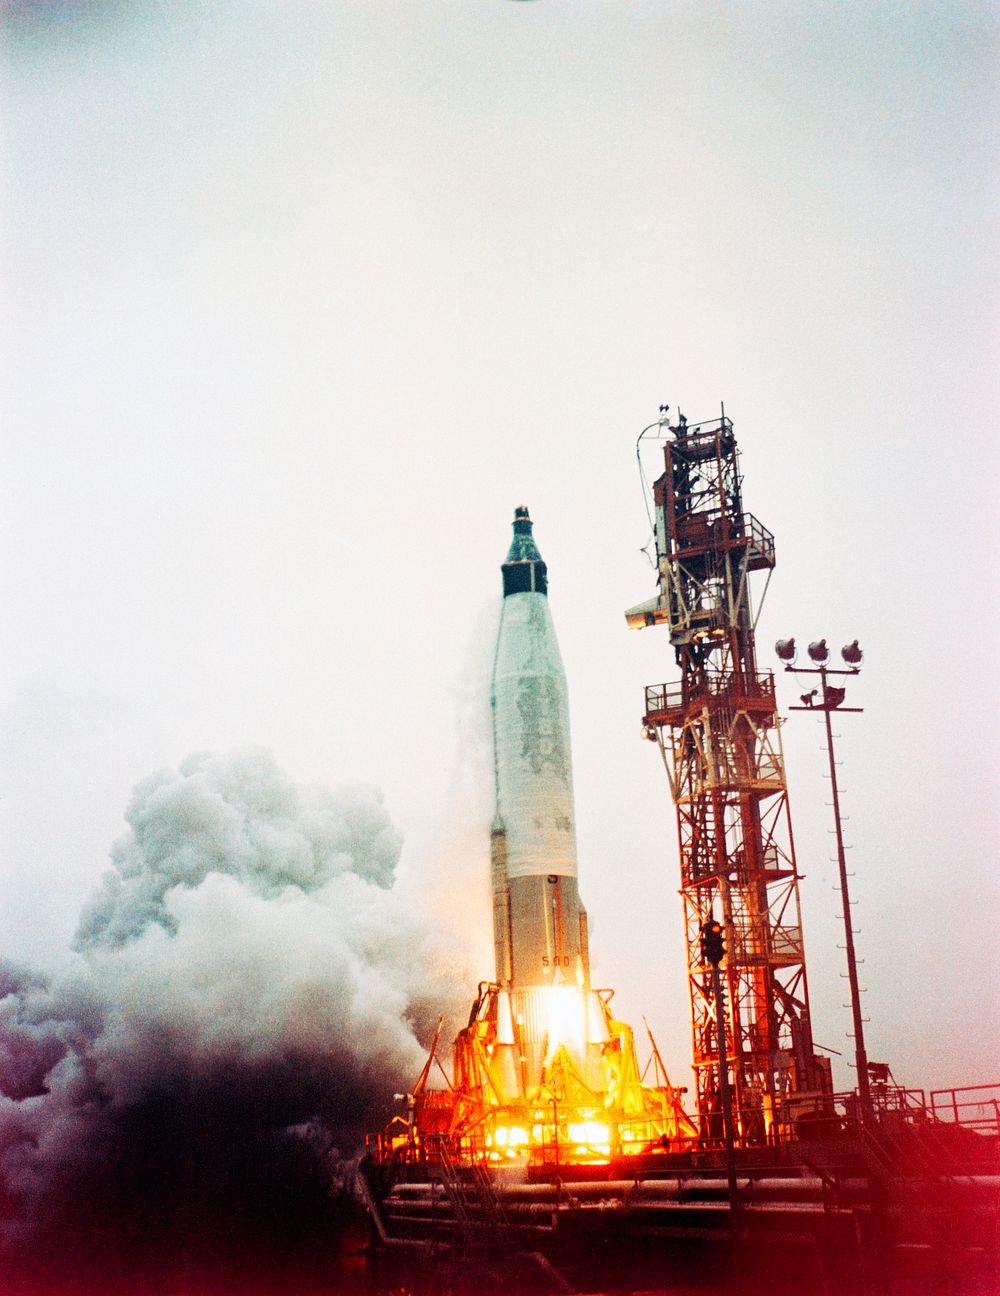 Launch of the unmanned Mercury Atlas-1 spacecraft, 29 July 1960. Original from NASA. Digitally enhanced by rawpixel.